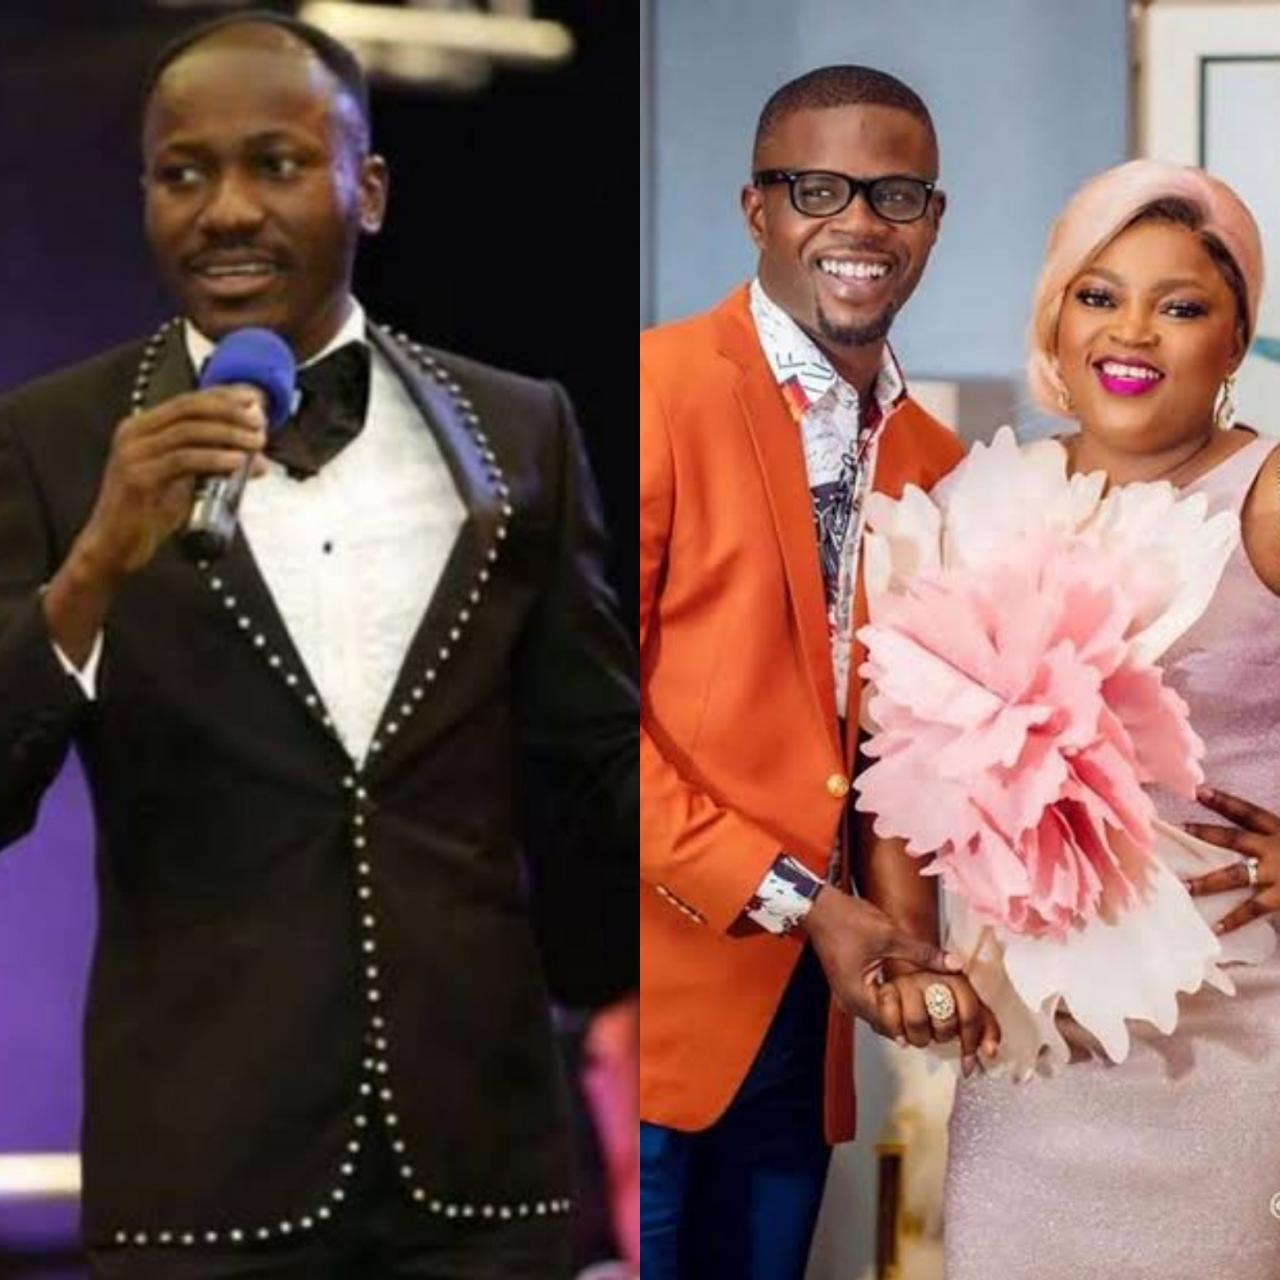 Apostle Suleman clarifies after he was accused of throwing shade at Funke Akindele and JJC Skillz with his 